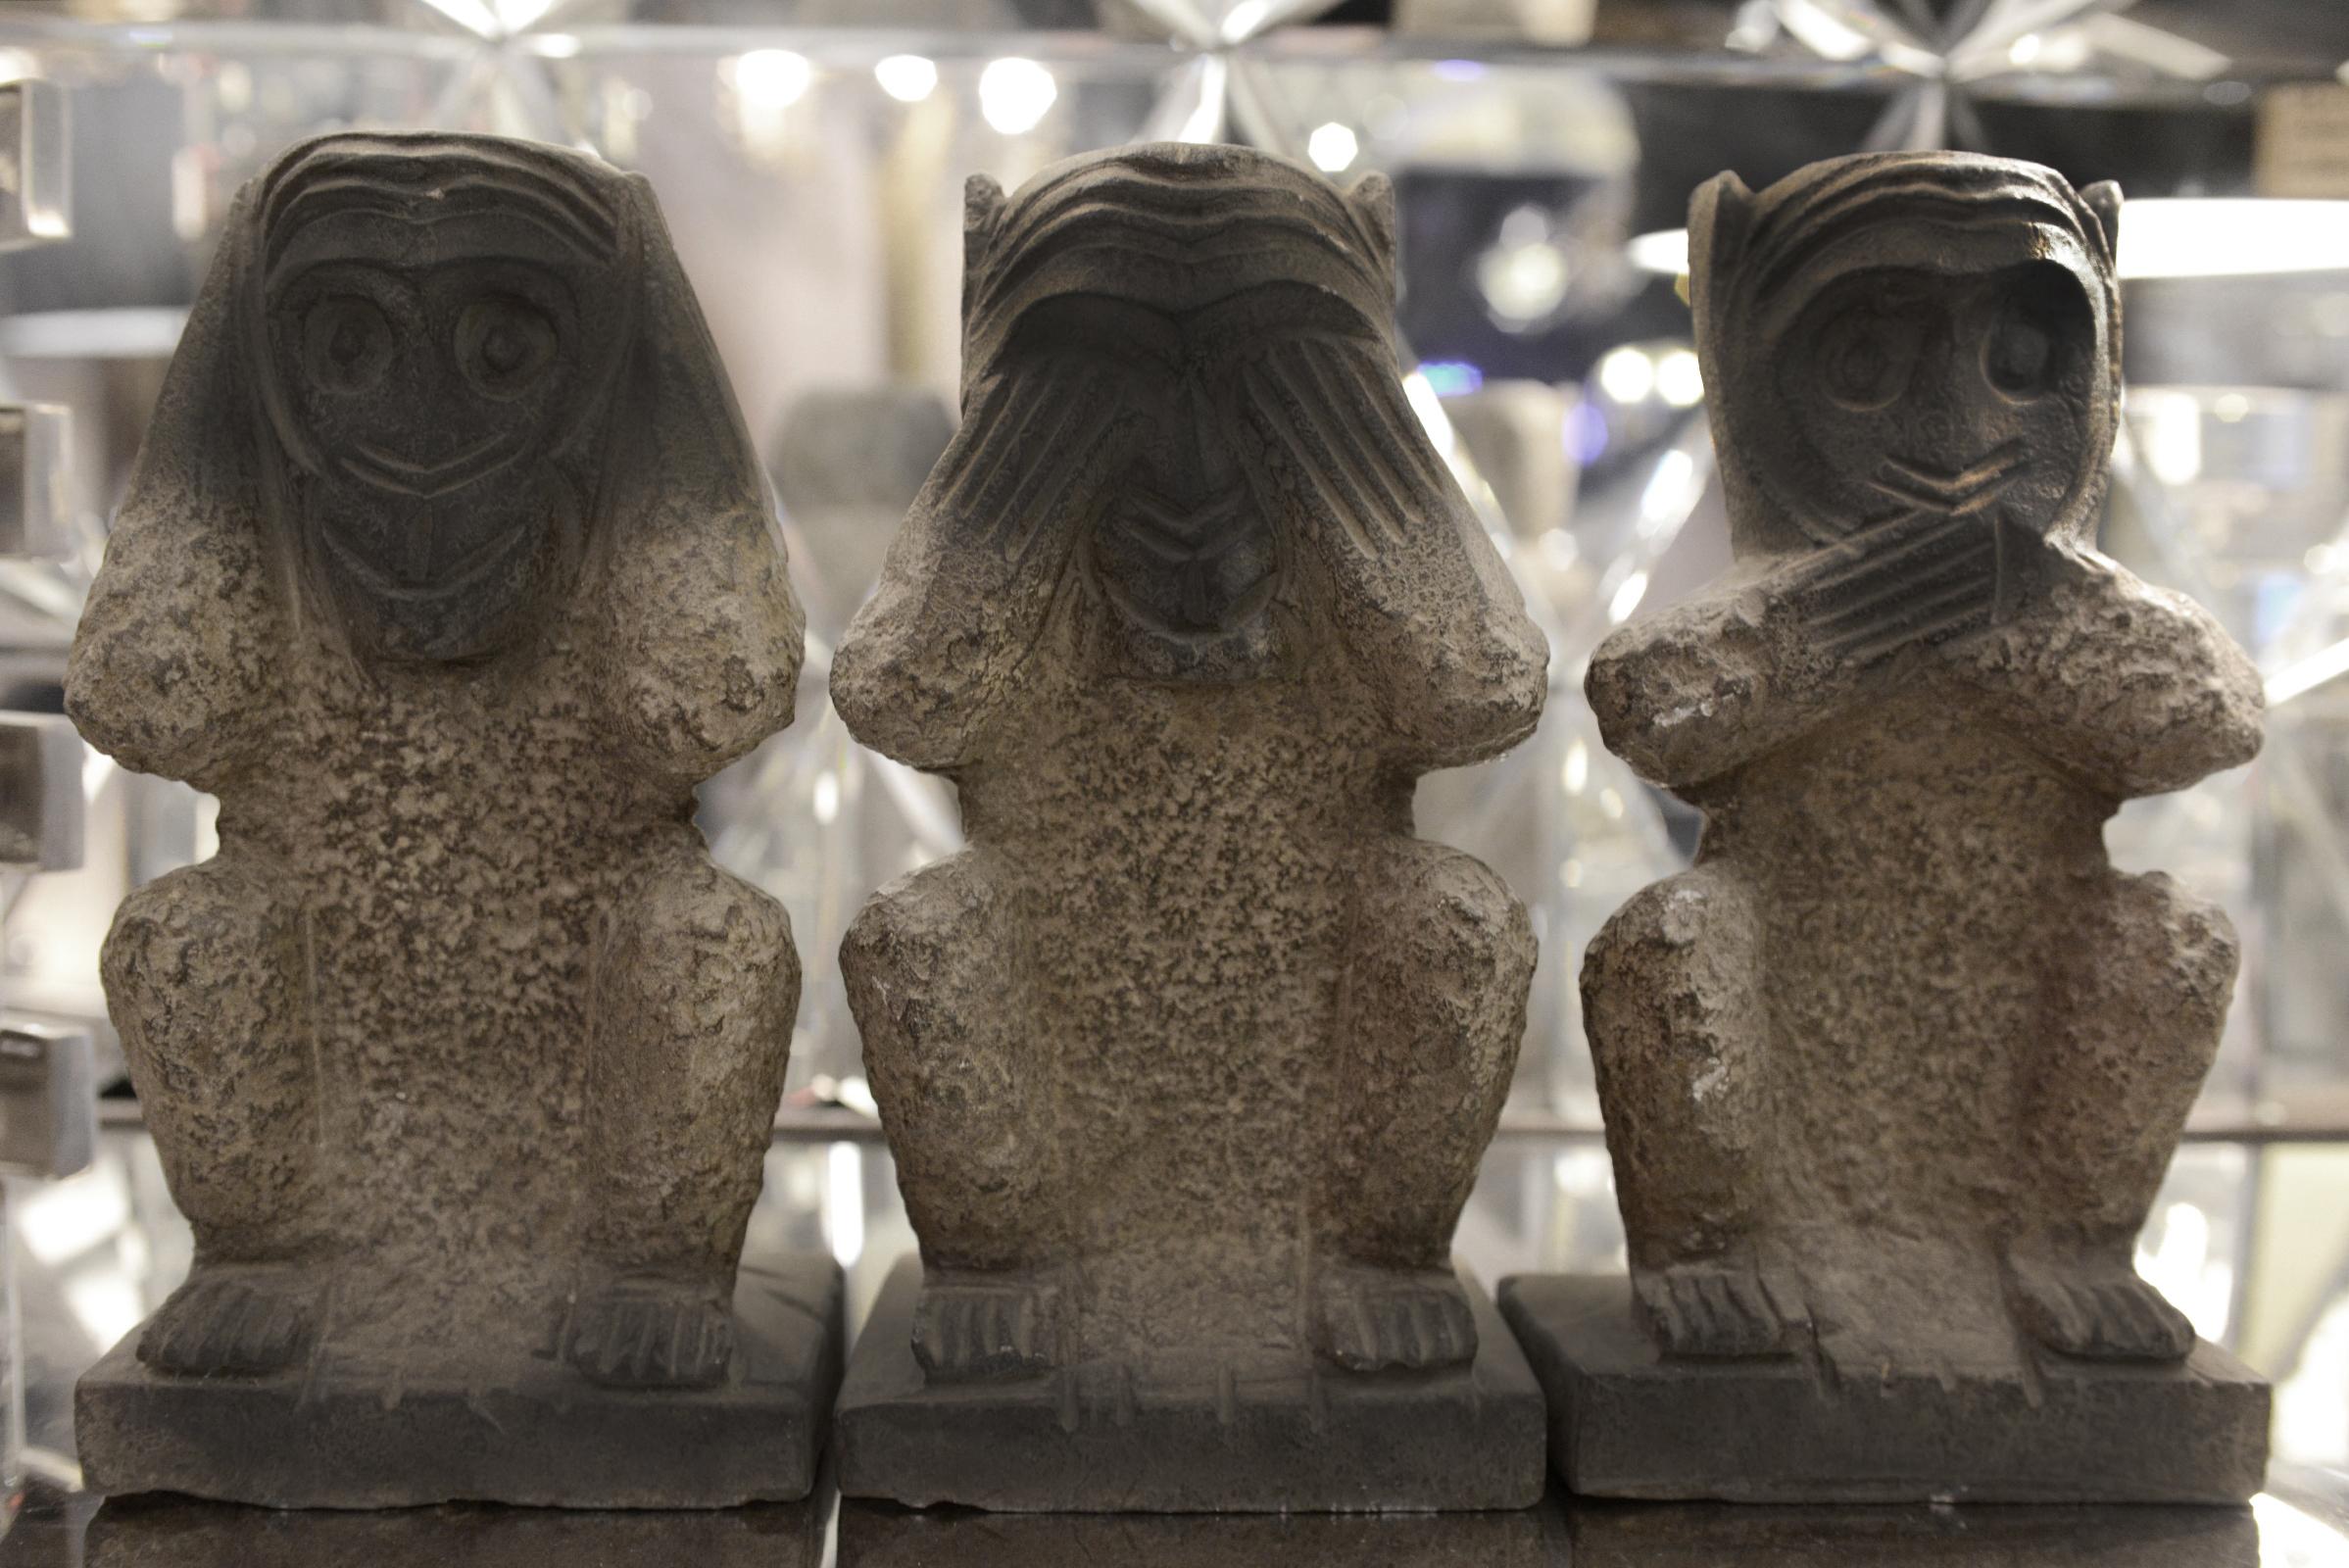 Sculpture stone monkeys set of 3 large
in carved stone. Measures: L 16 x D 12 x H 32cm each.